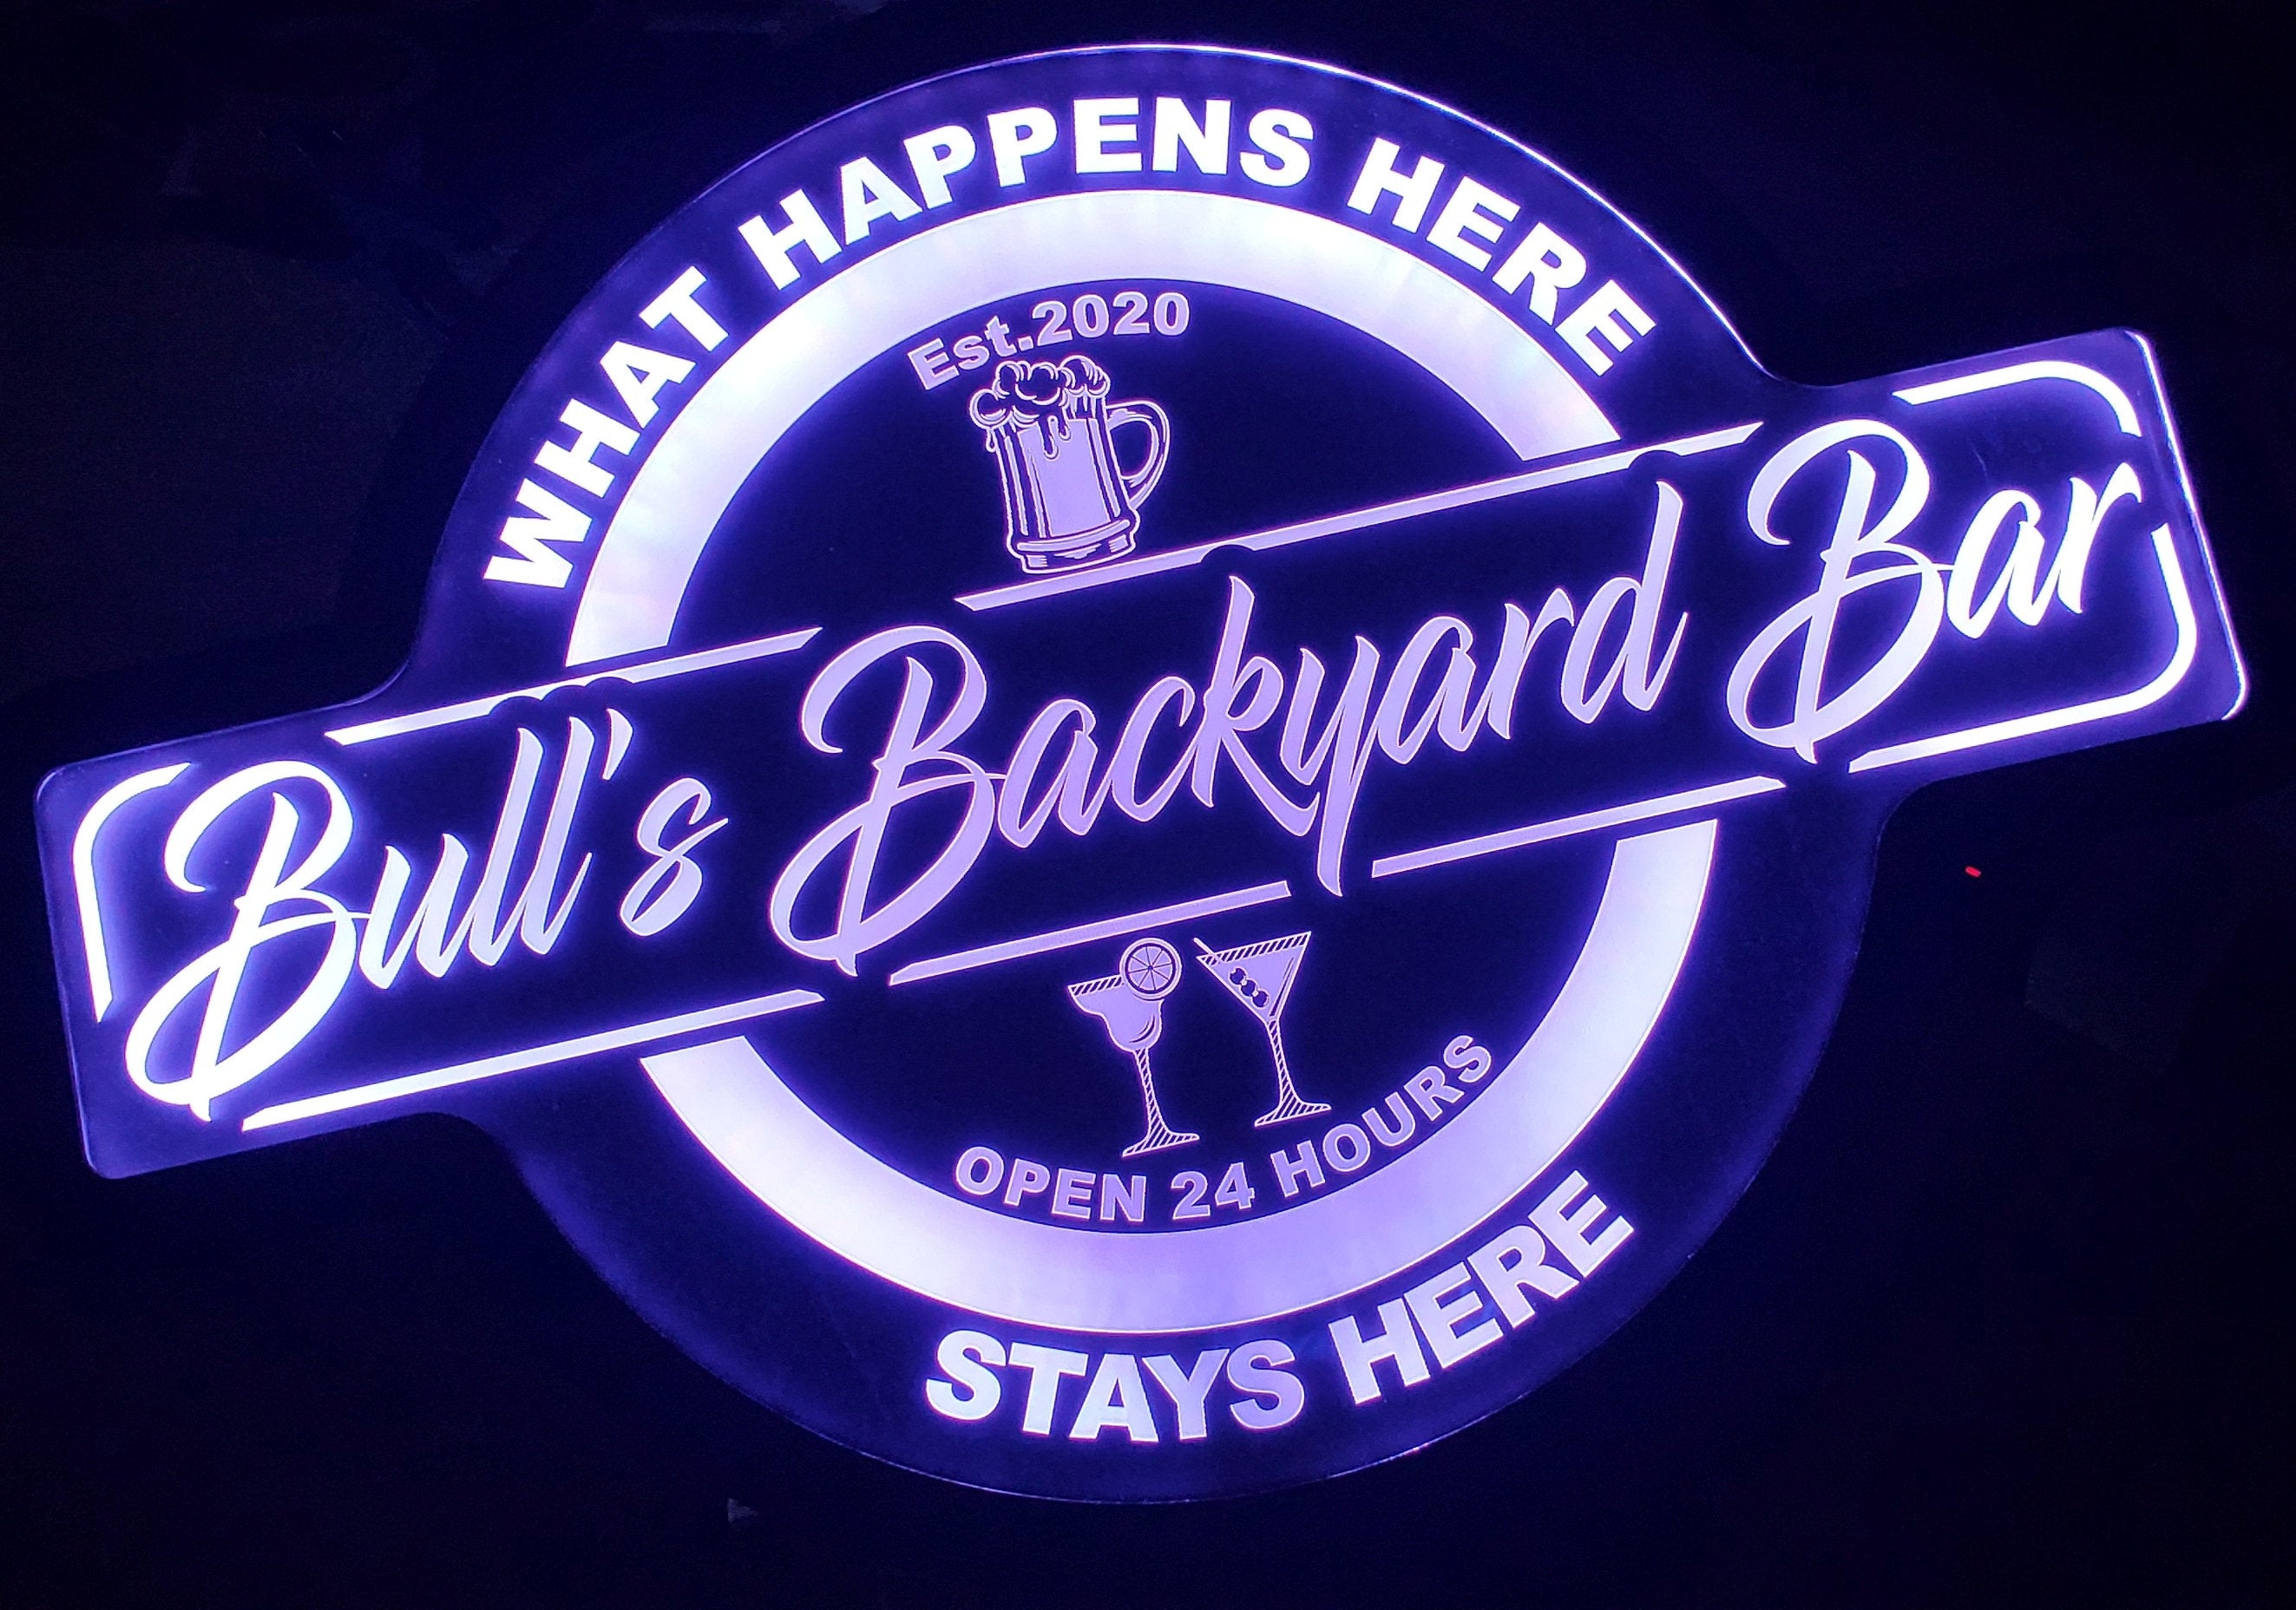 Custom Bar Led Wall Sign Neon Like - Color Changing Remote Control - 4 Sizes Free Shipping